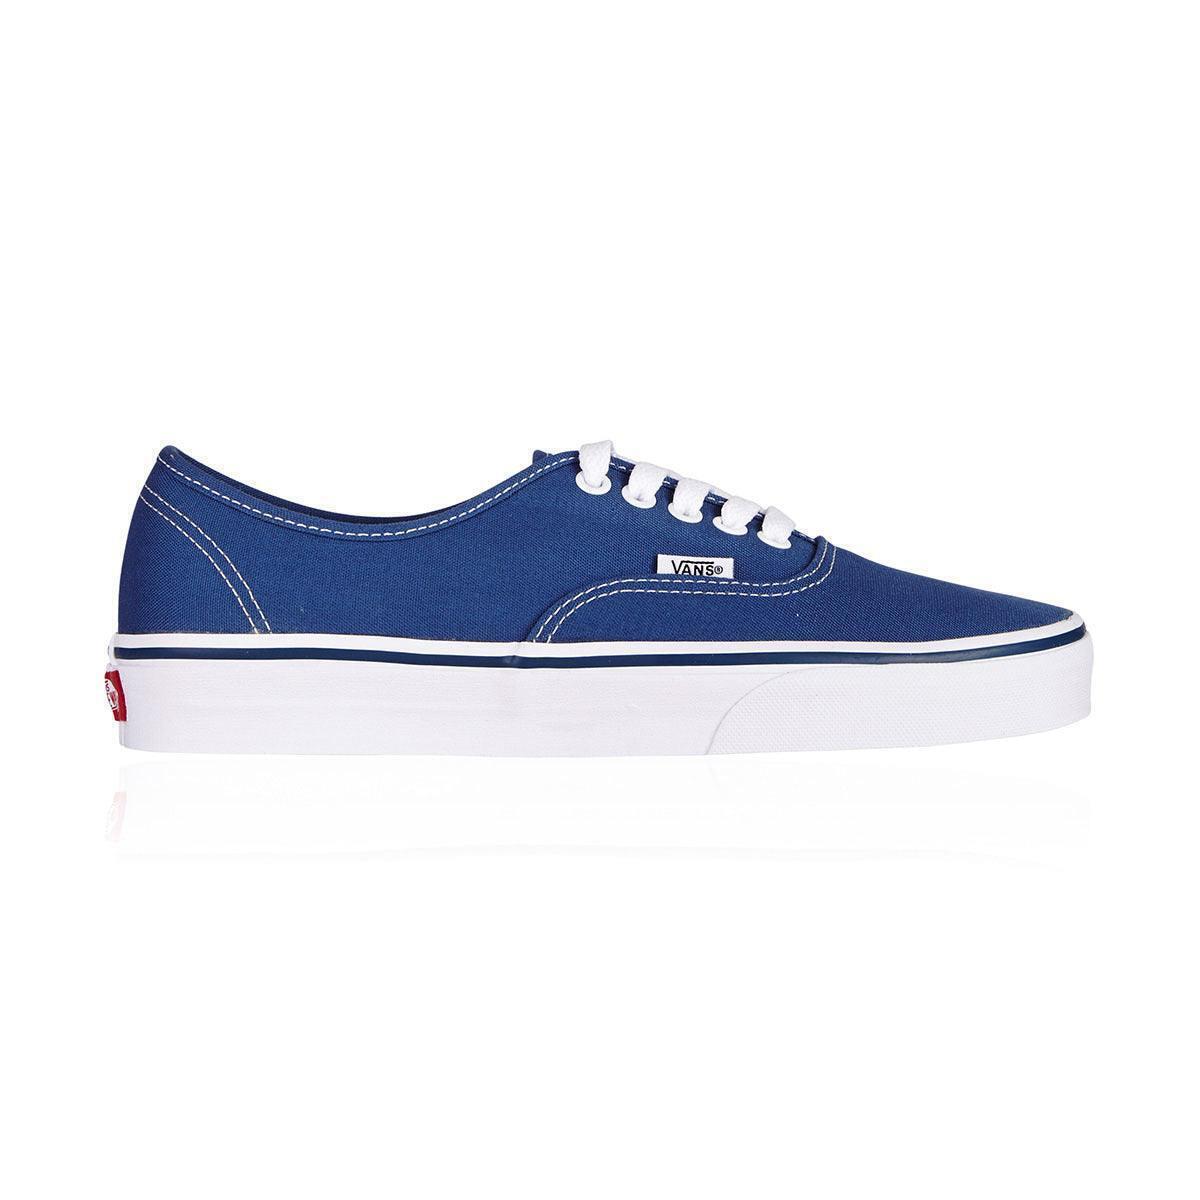 Vans - Authentic Casual Shoes Casual Shoes - Mens US 4.5/Womens US 6 - Navy